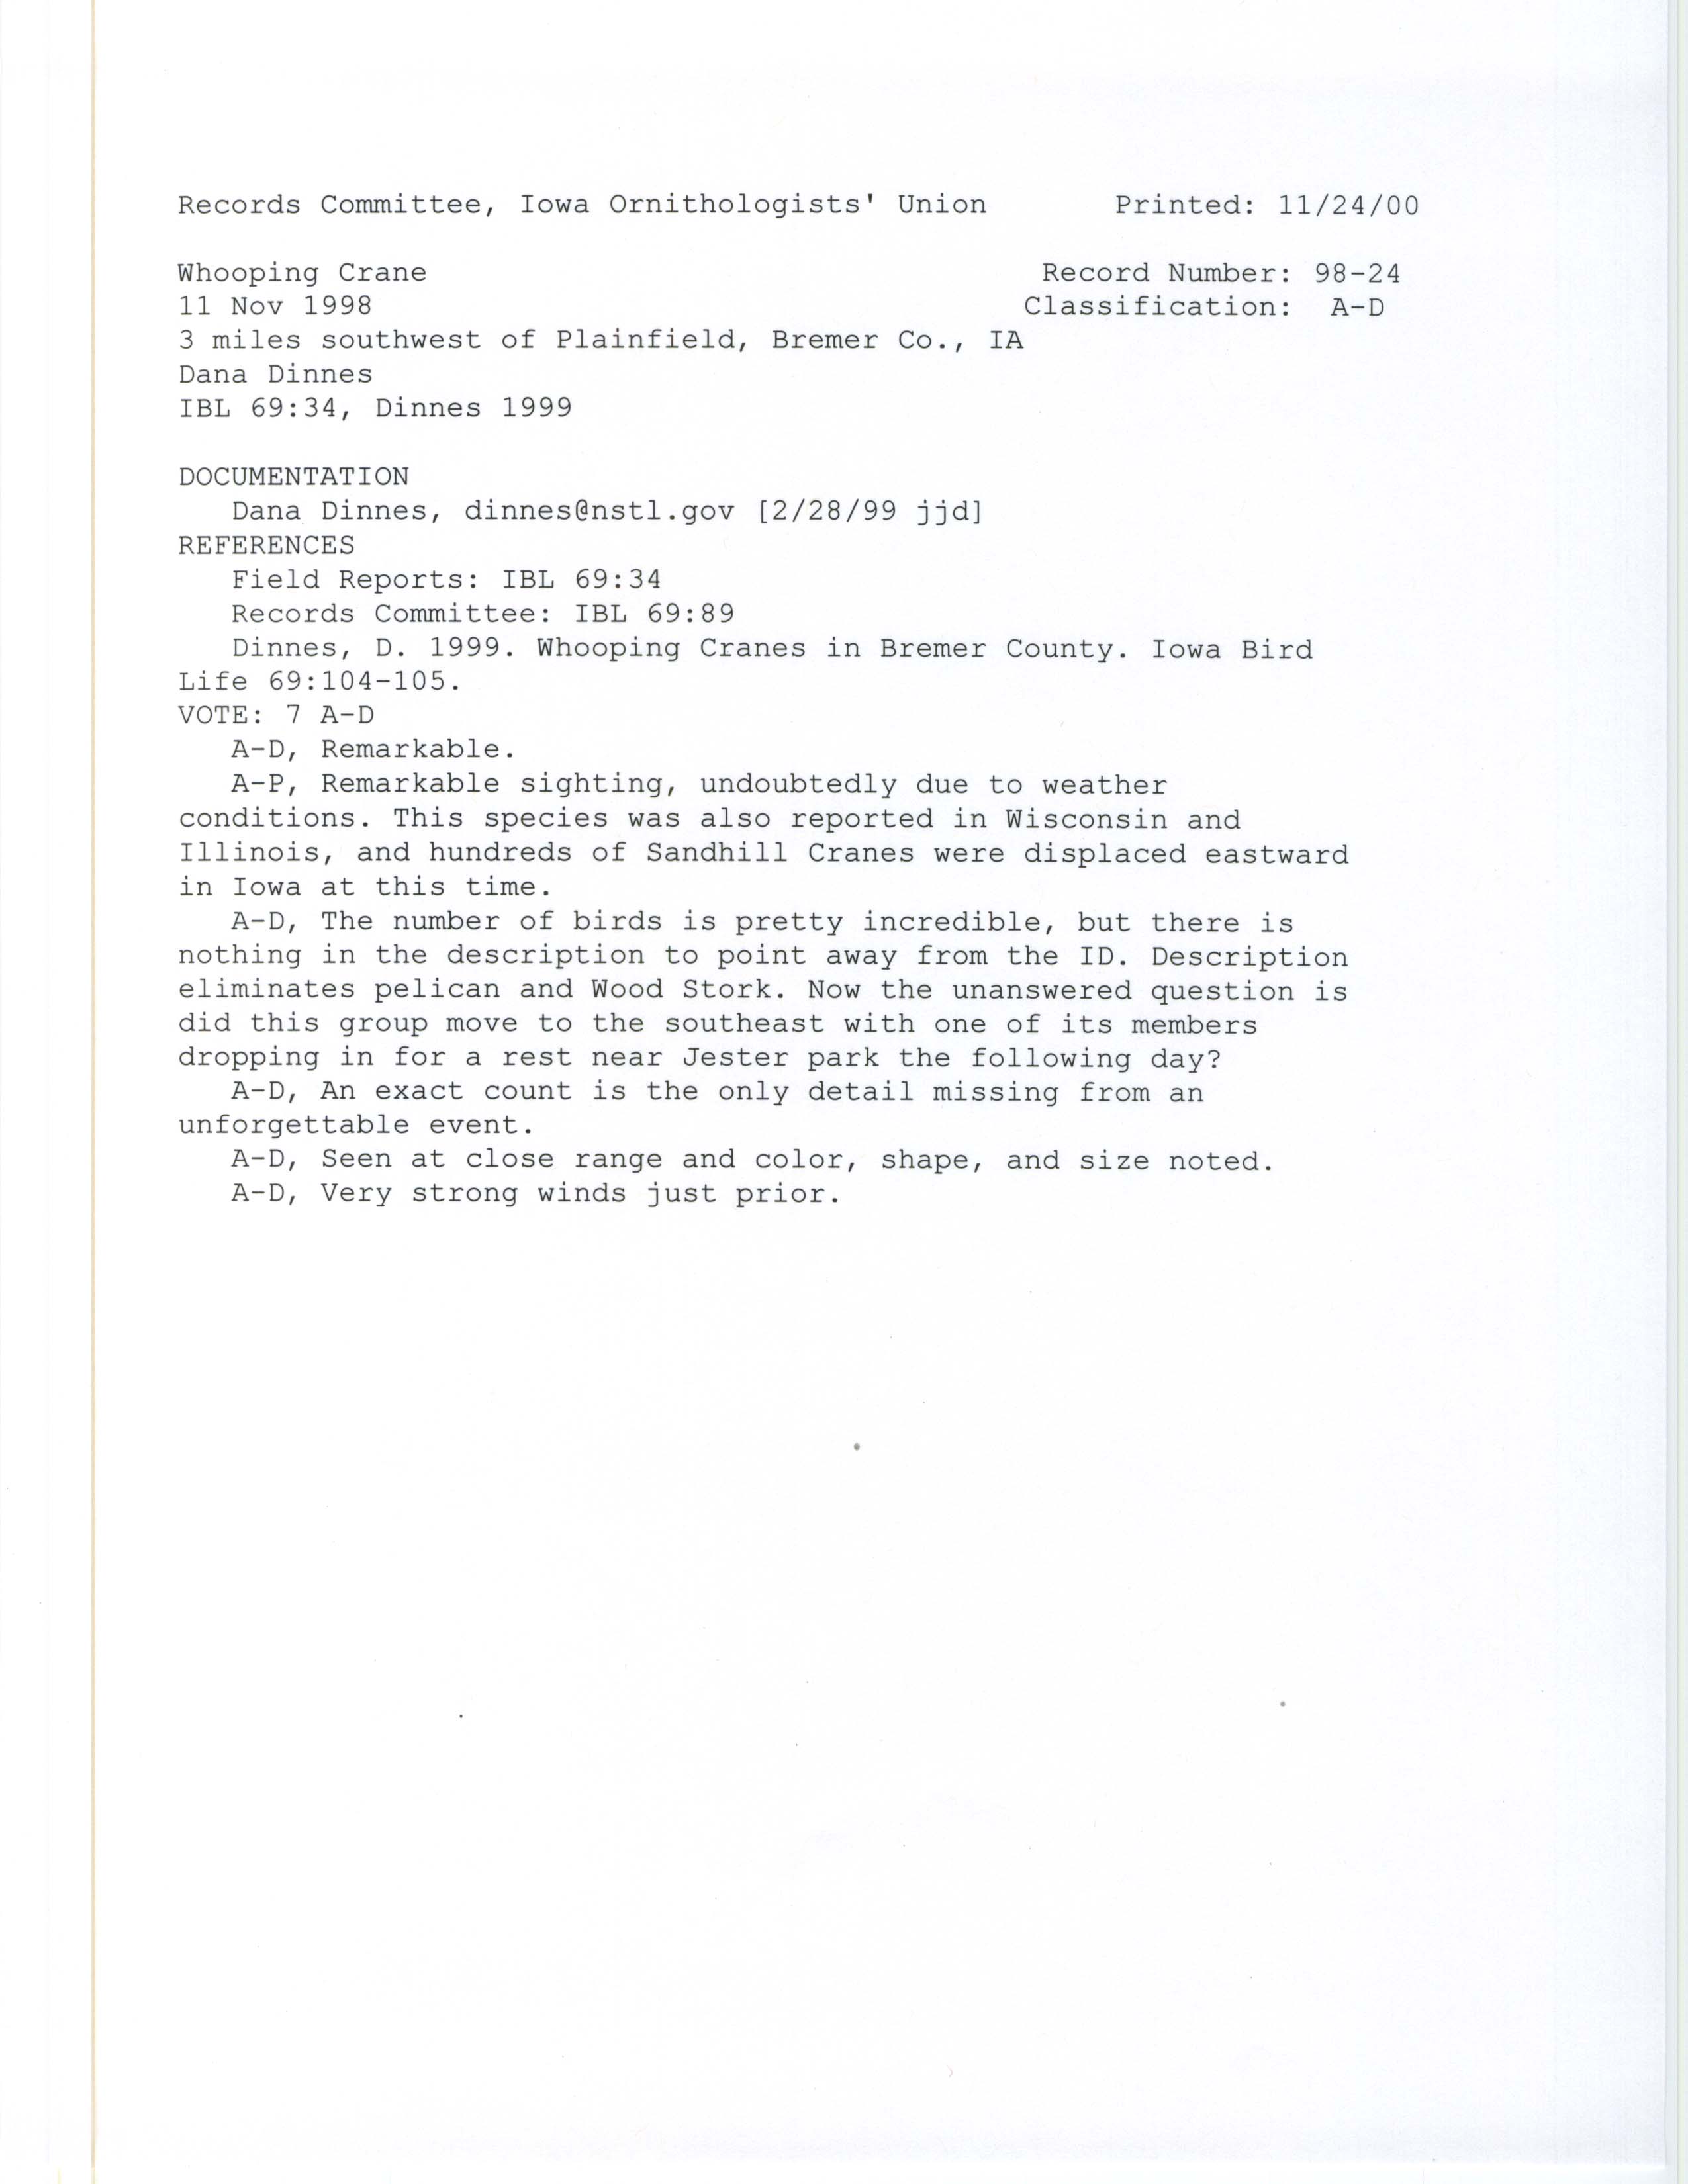 Records Committee review for rare bird sighting for Whooping Crane southeast of Plainfield, 1998